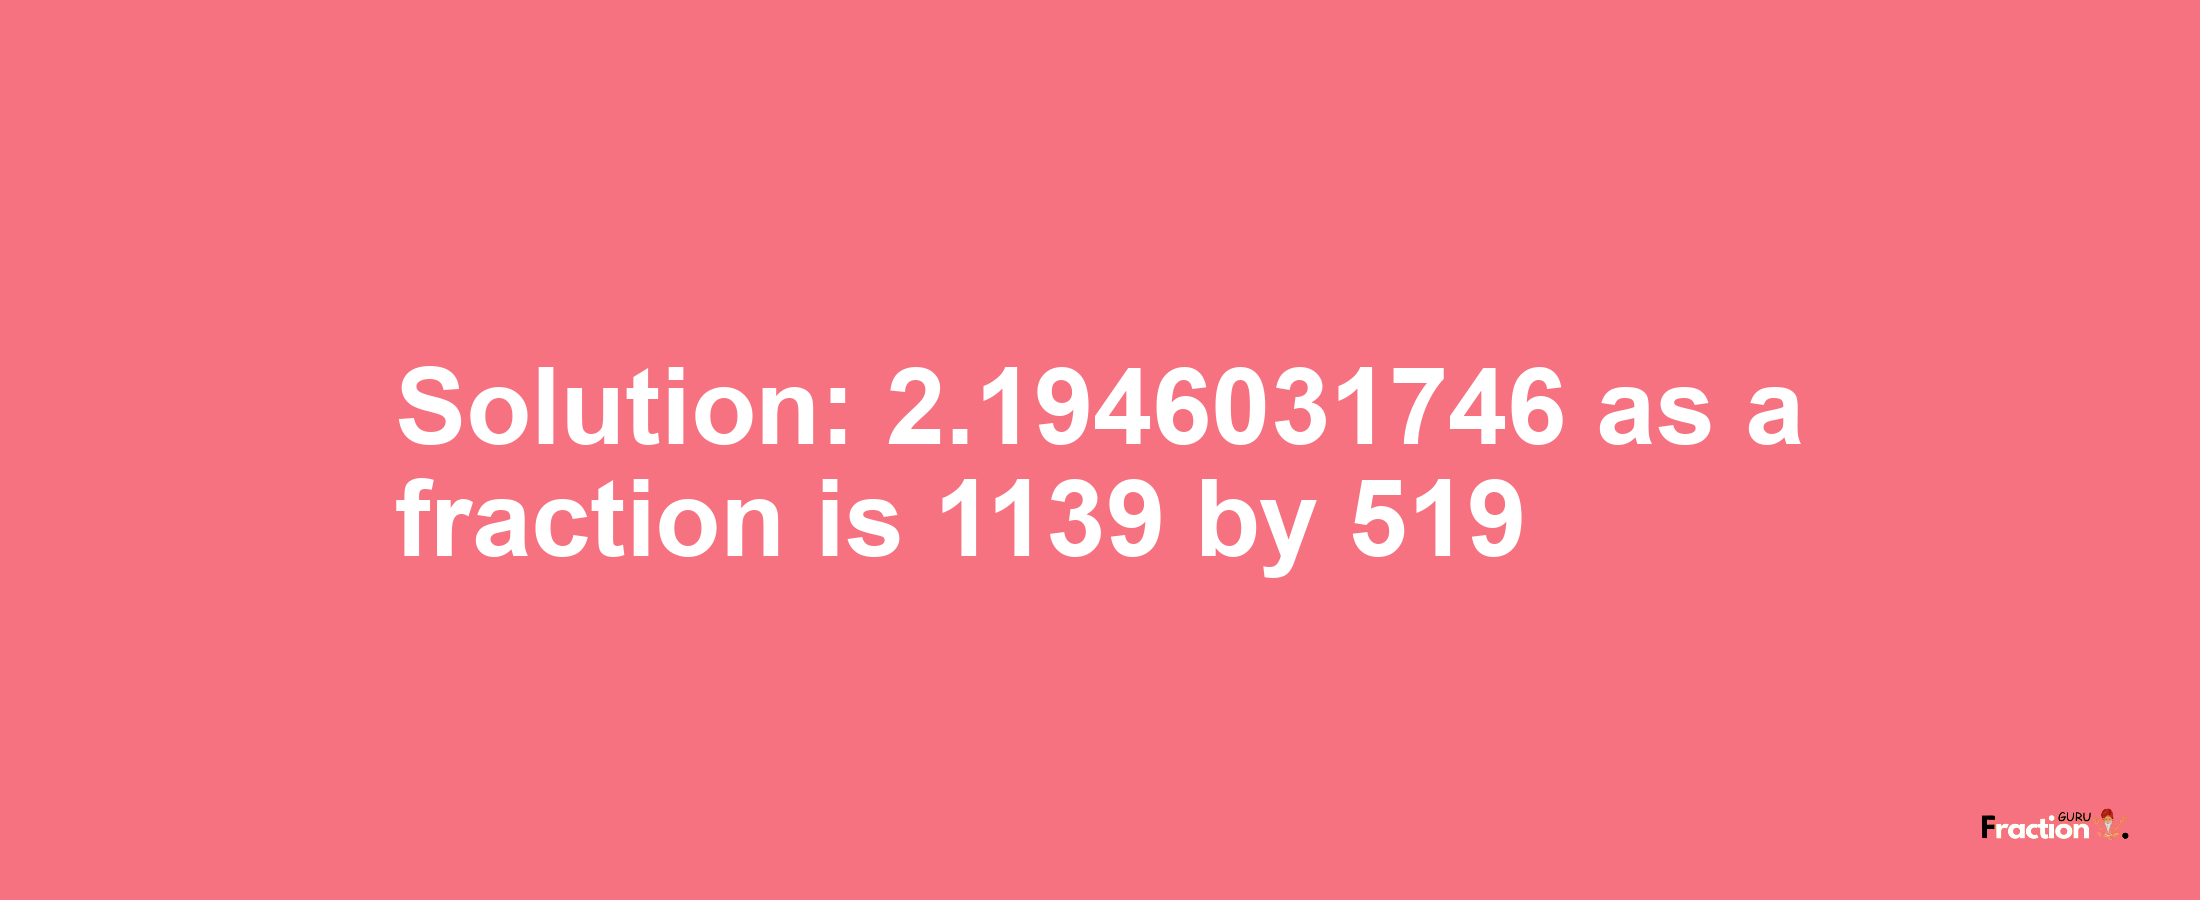 Solution:2.1946031746 as a fraction is 1139/519